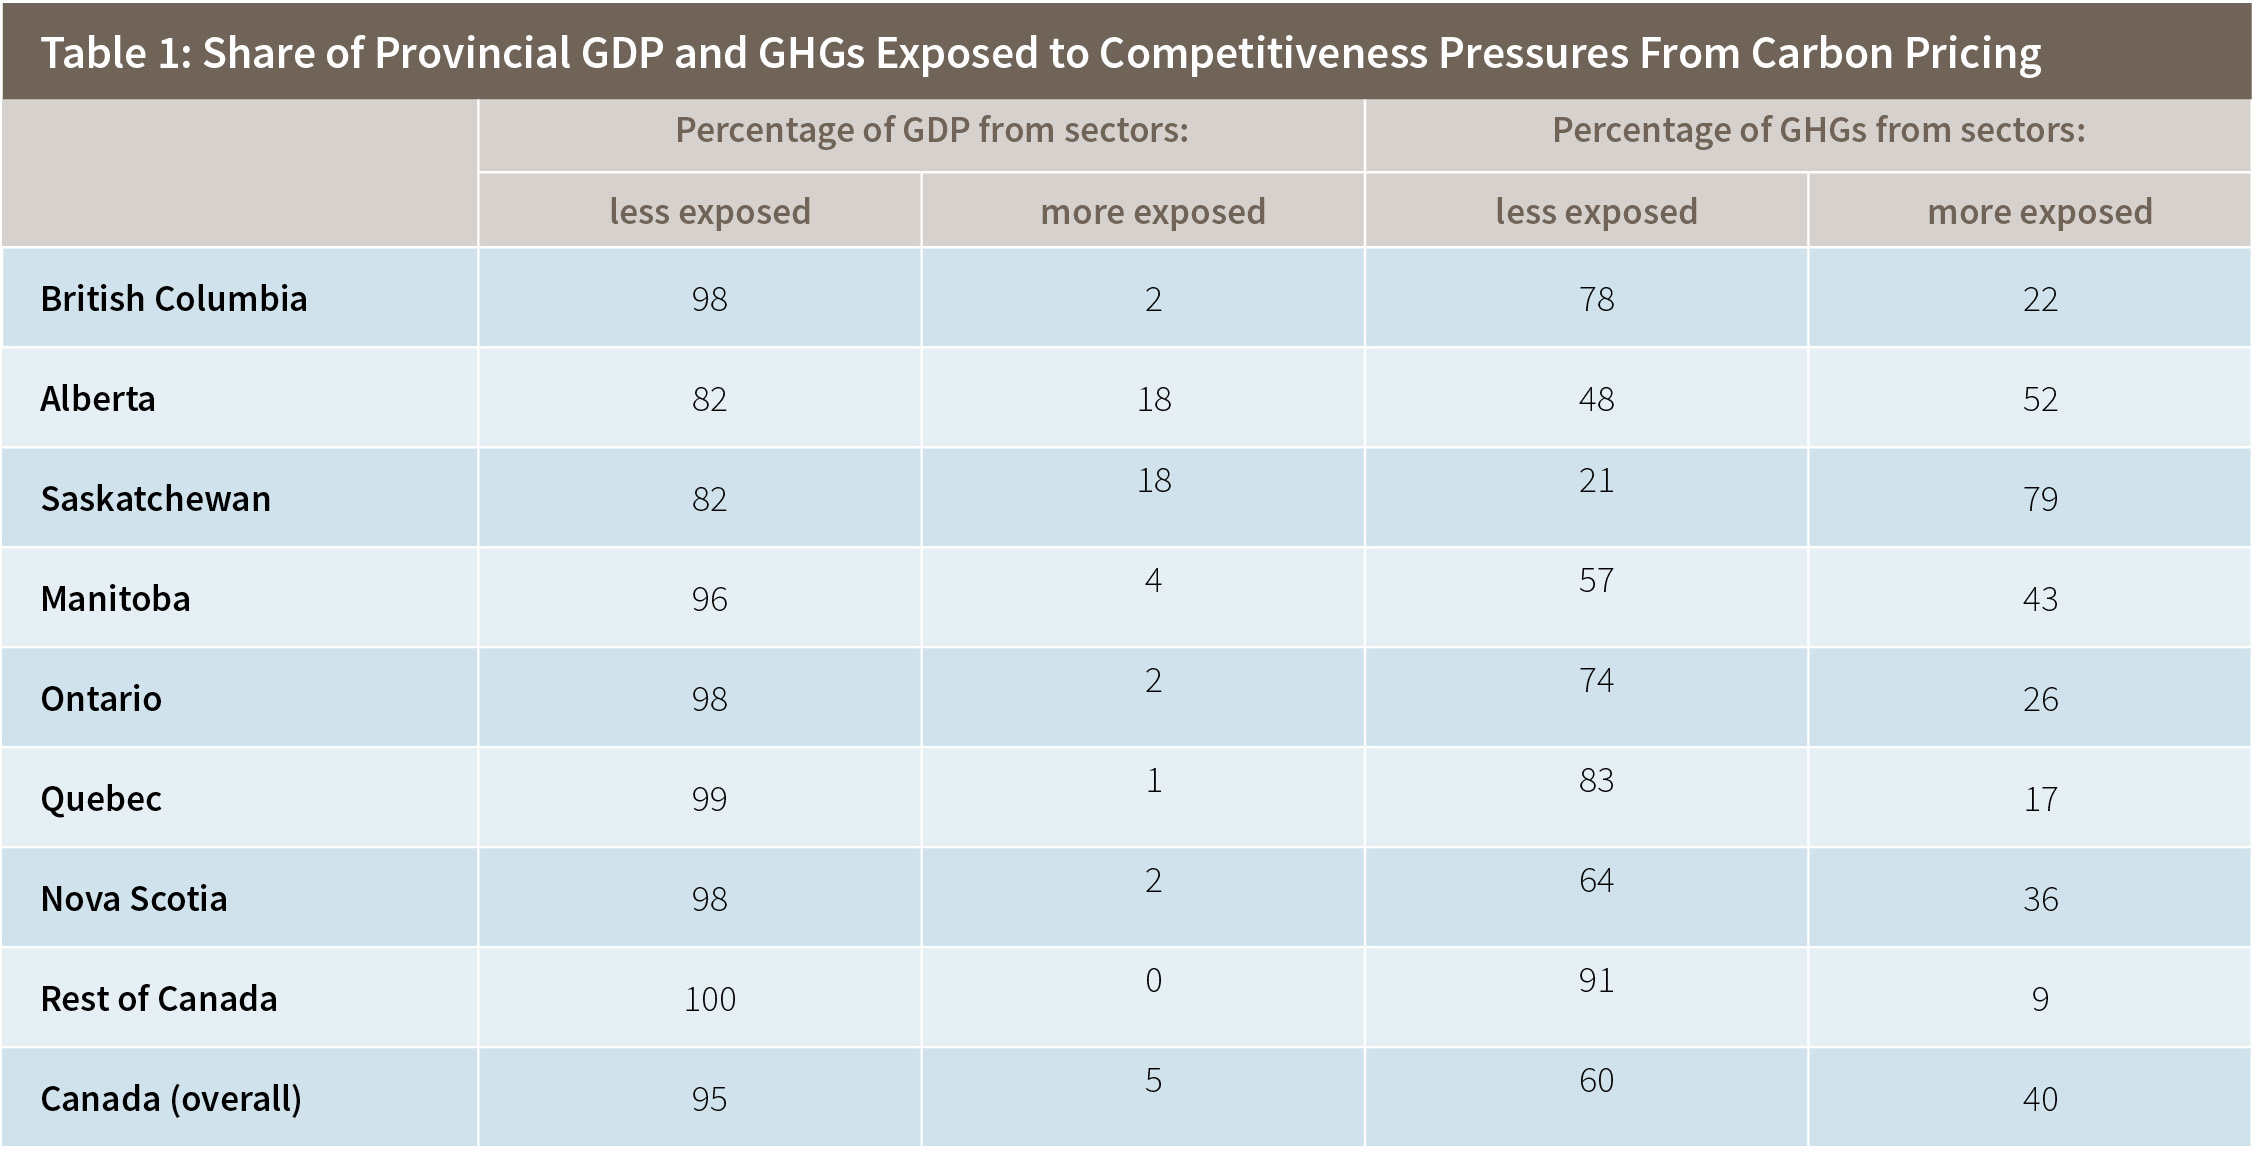 Table 1: Share of Provincial GDP and GHGs Exposed to Competitiveness Pressures From Carbon Pricing